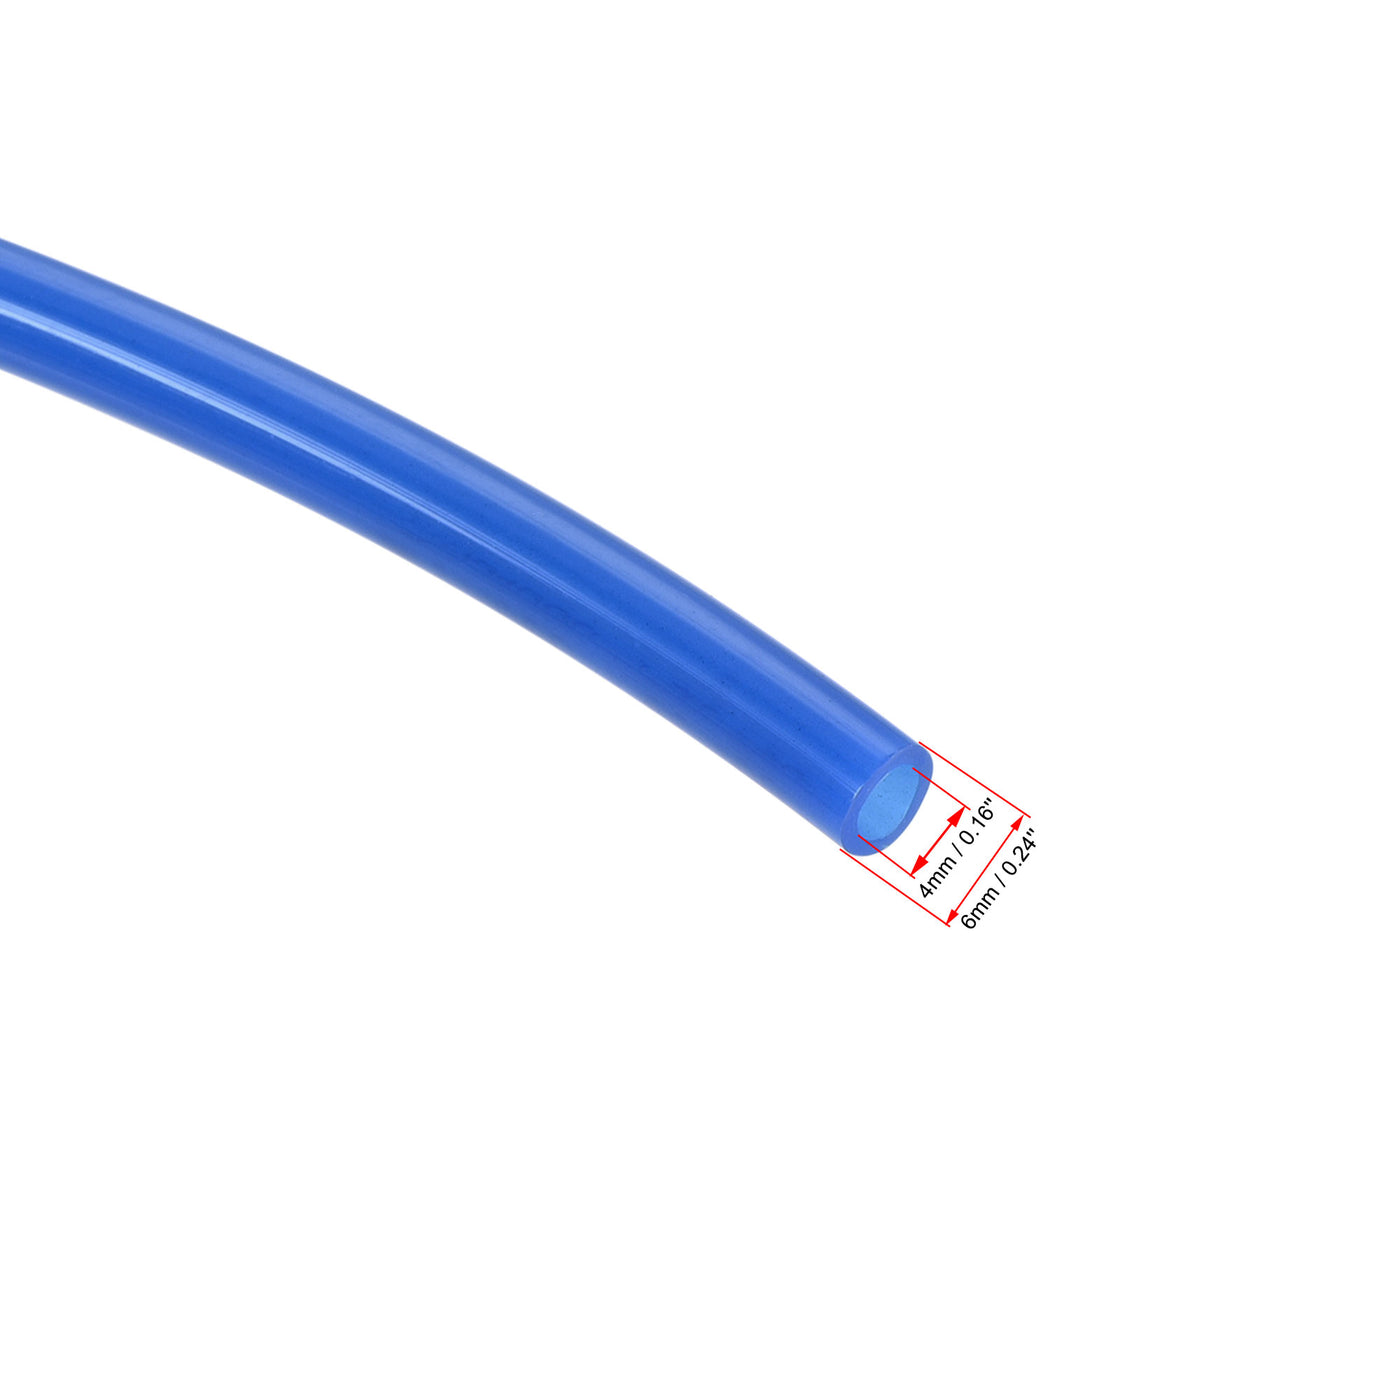 uxcell Uxcell Pneumatic 6mm OD PU Air Hose Tubing Kit 5 Meters Blue with 12 Pcs Push to Connect Fittings